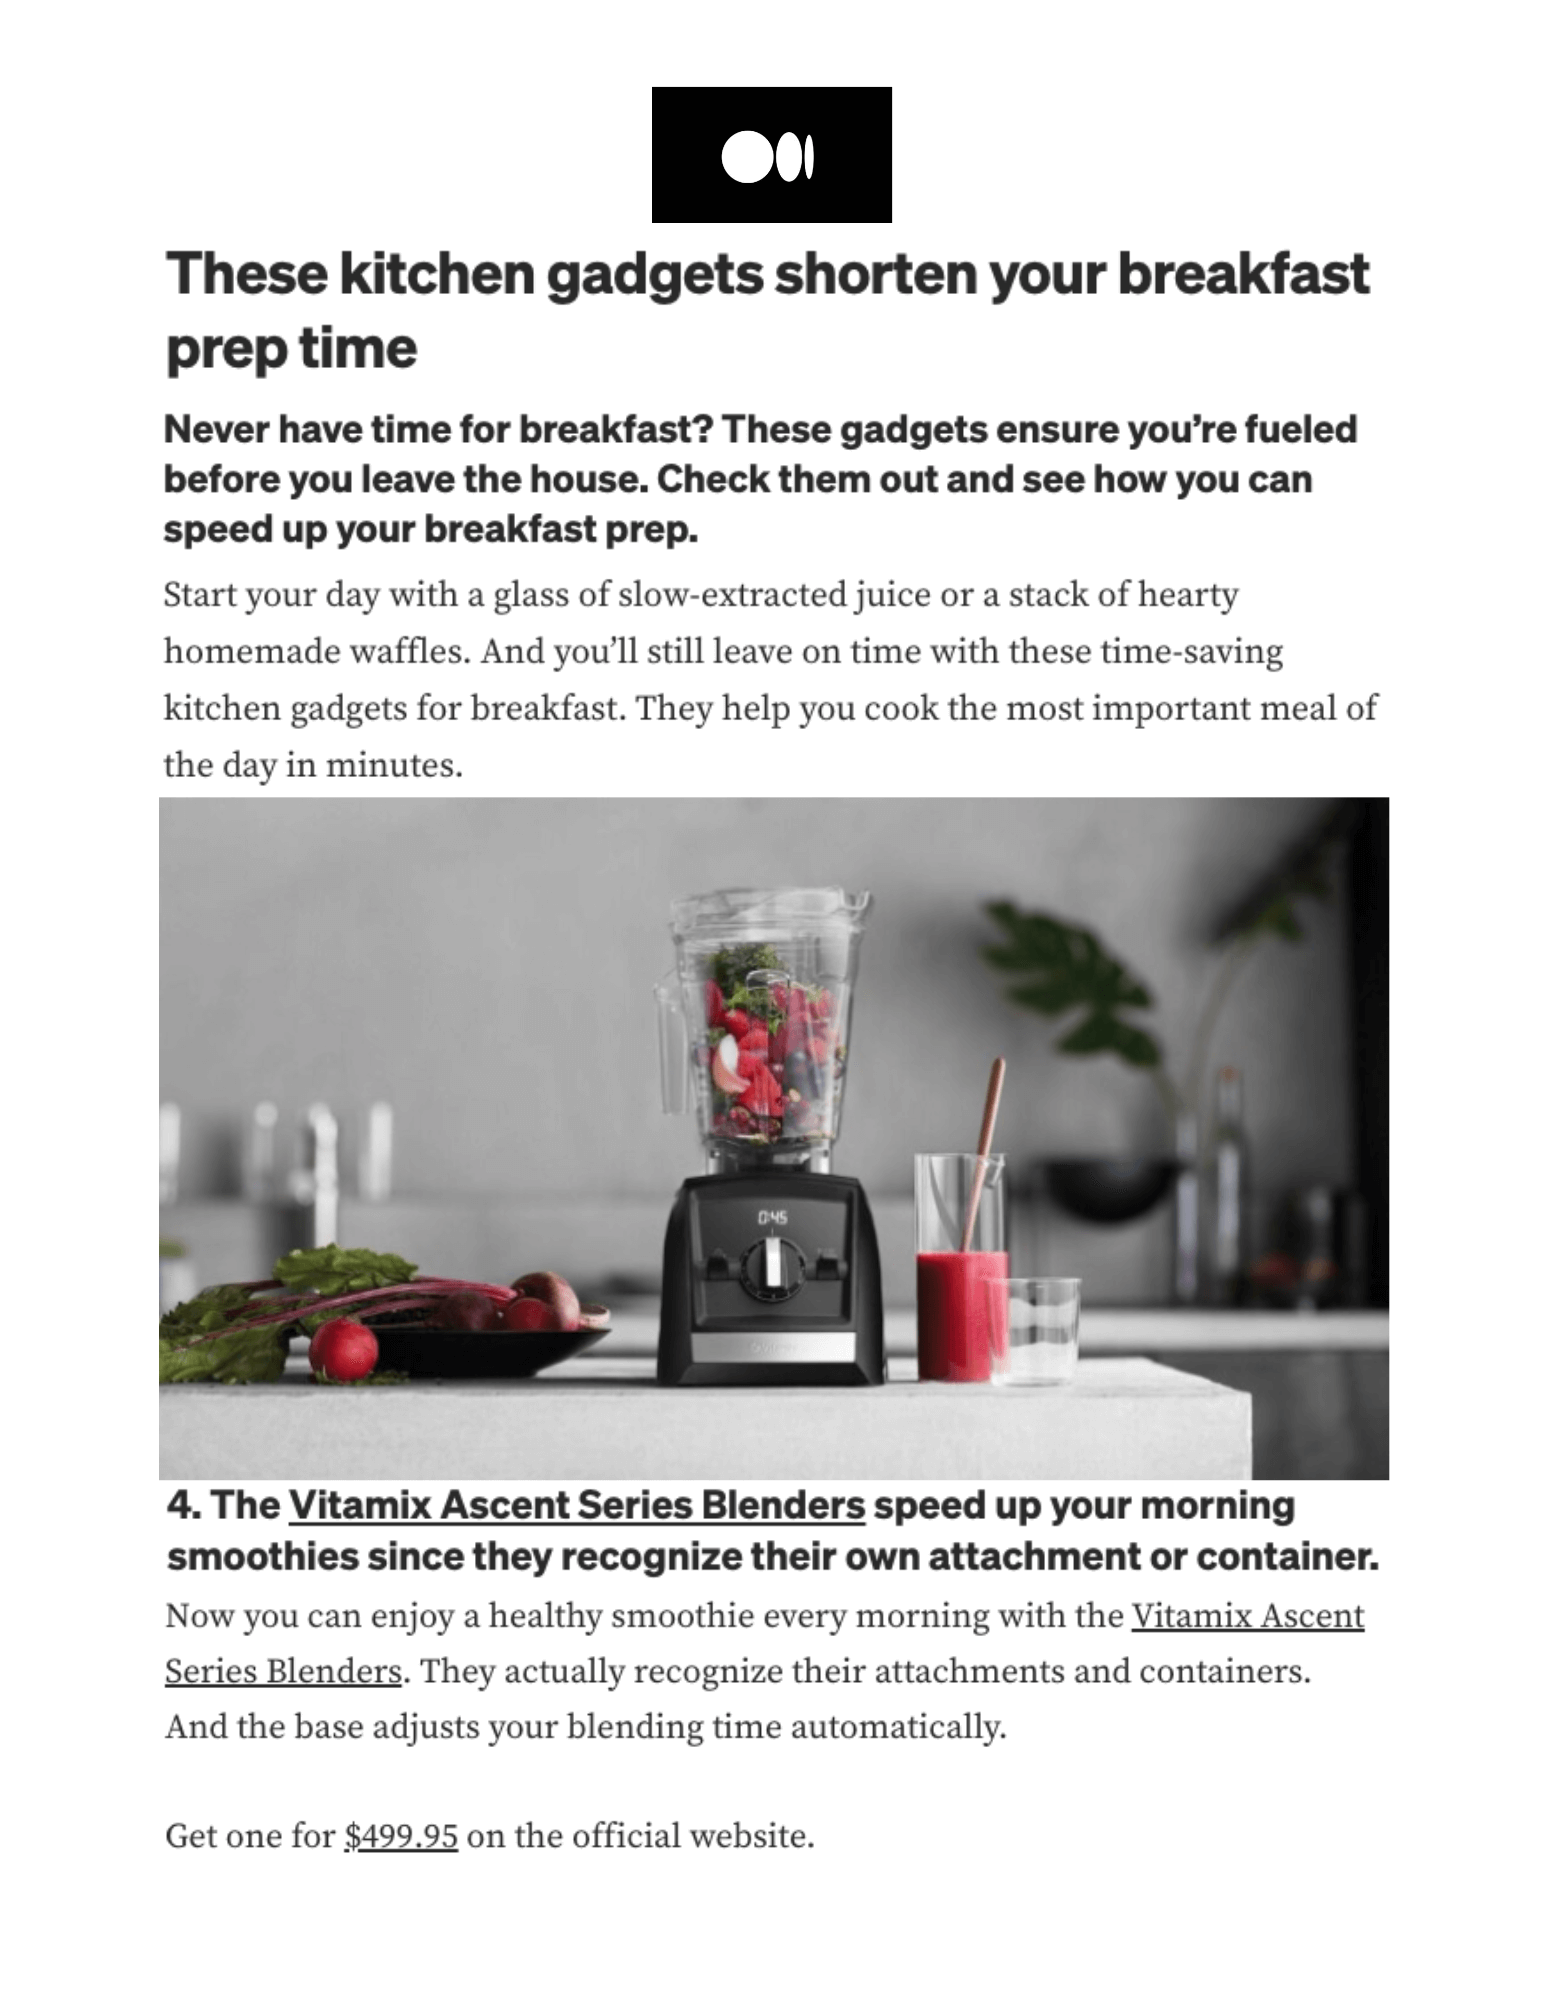 These Kitchen Gadgets Shorten Your Breakfast Prep Time
Featured Brands include:Vitamix

Read More